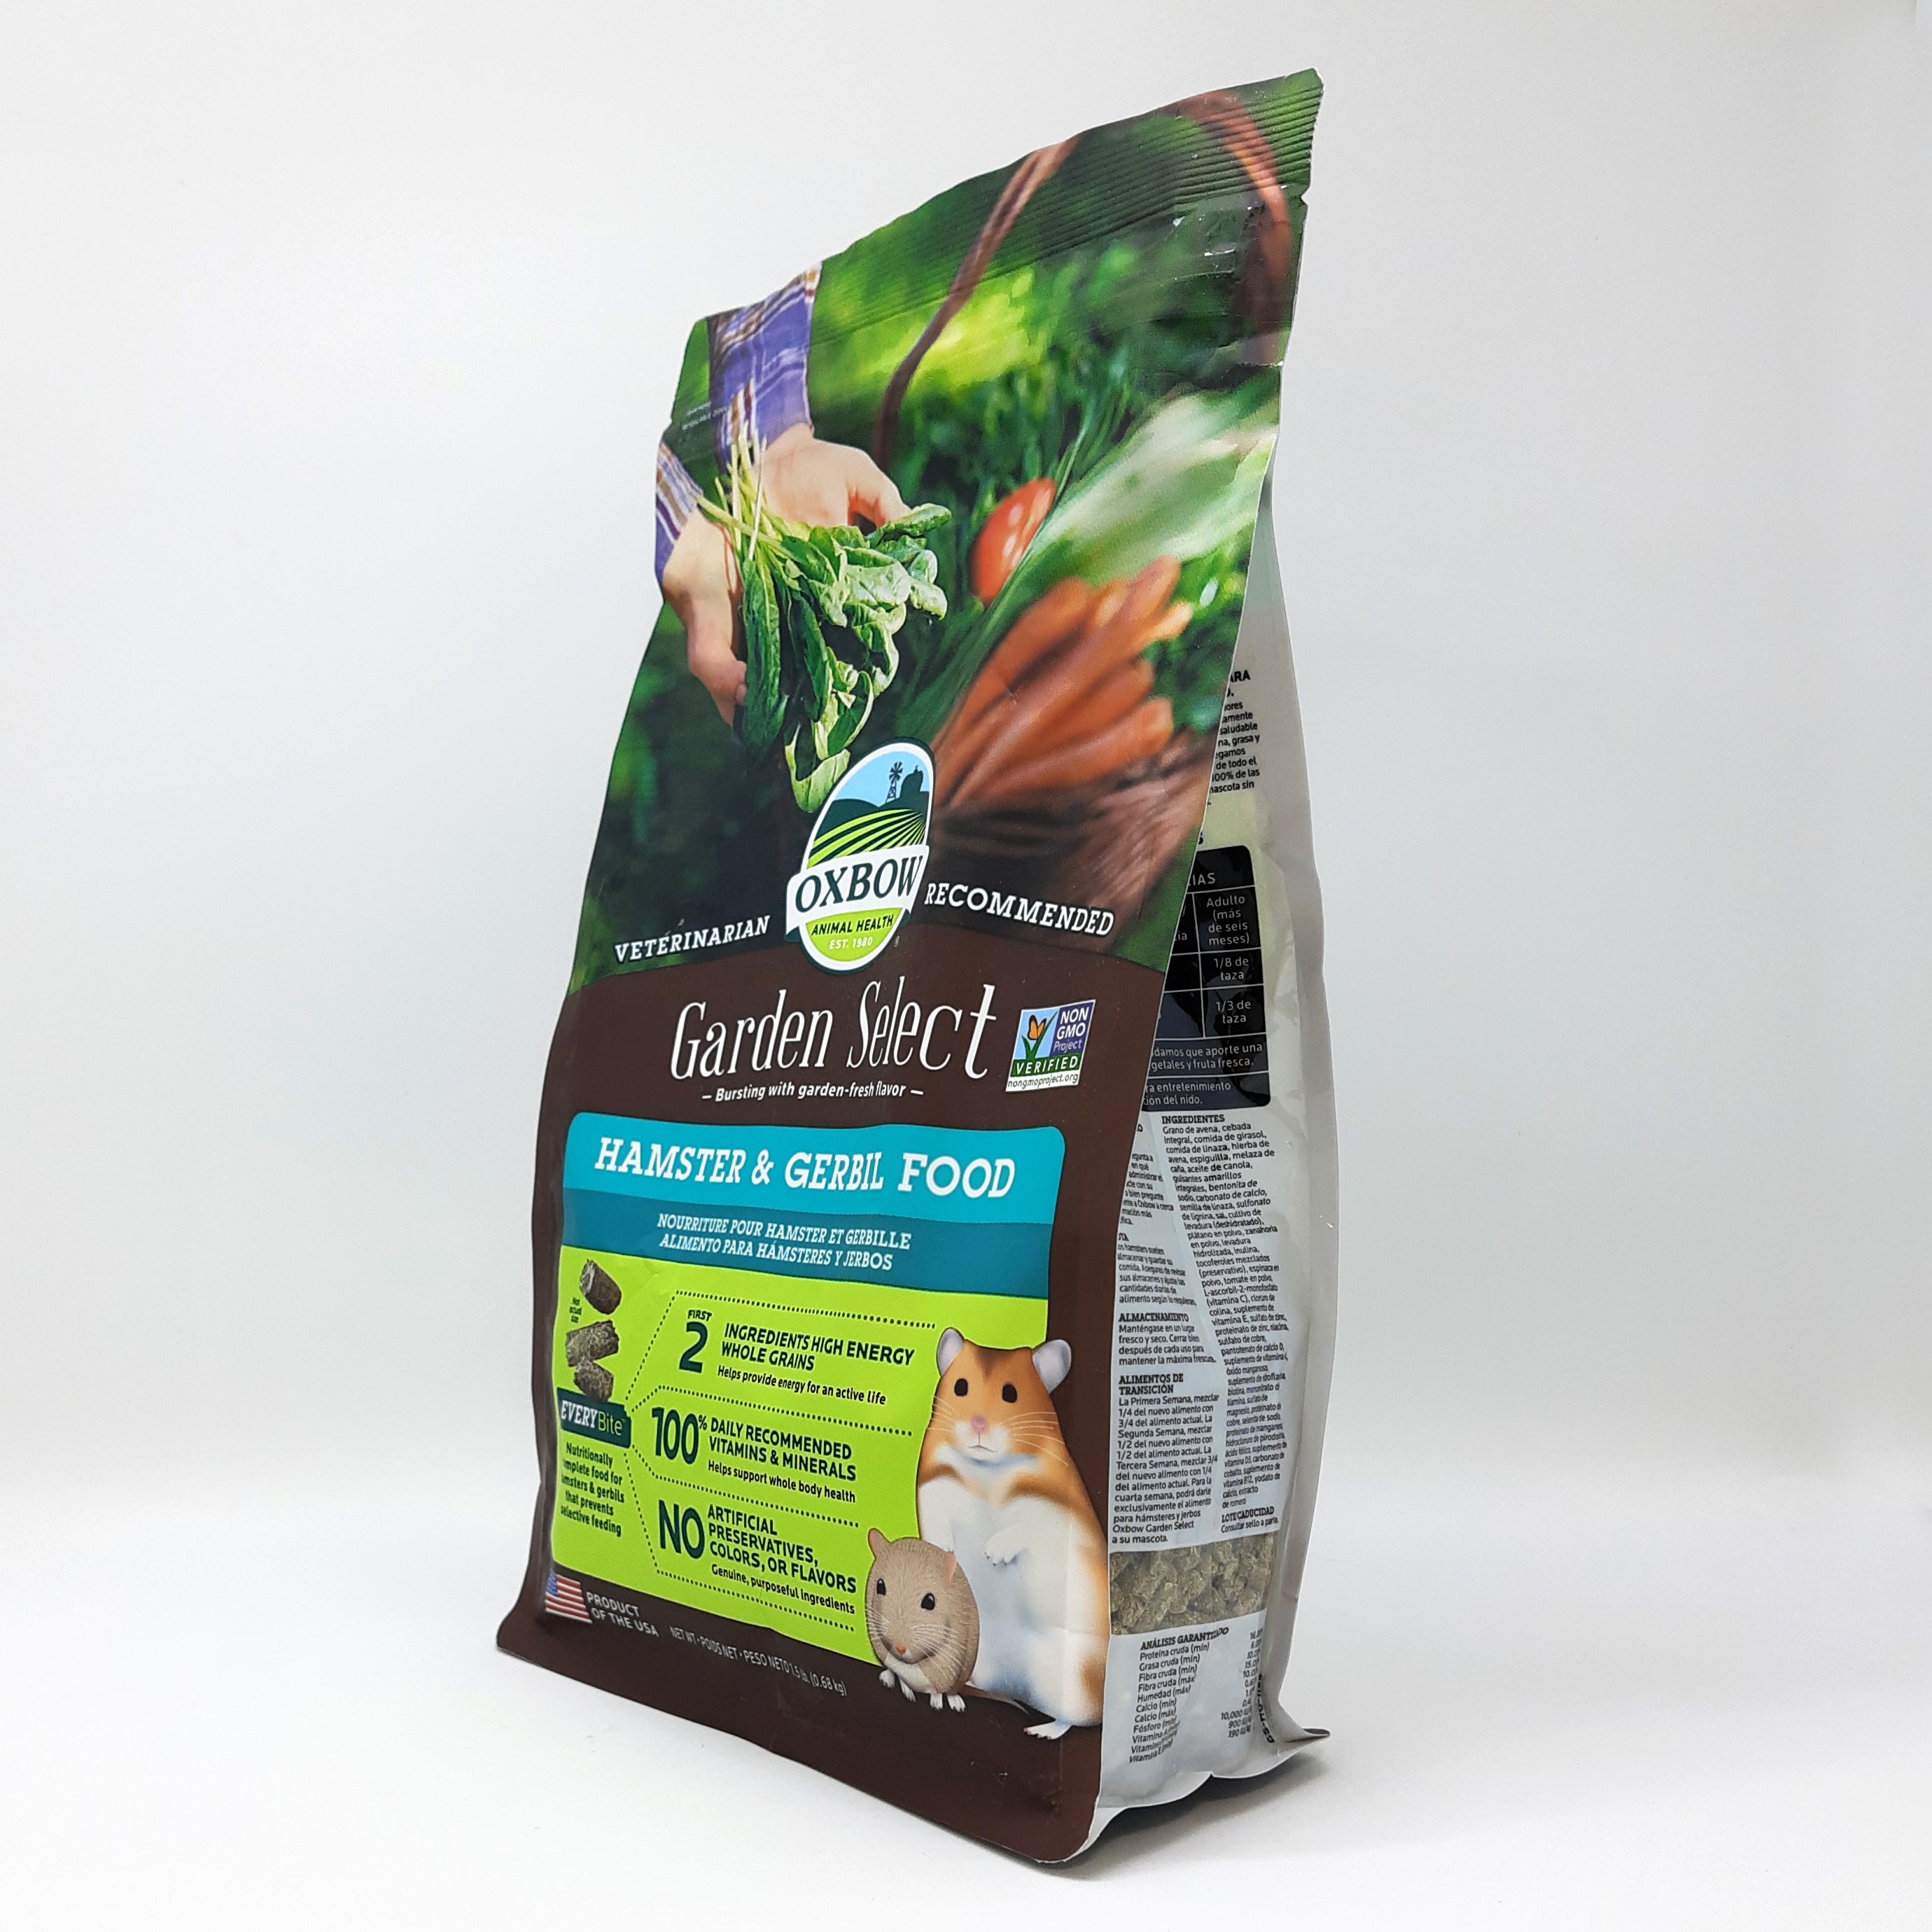 Alimento Para Hamster y Jerbo Garden Select Oxbow 680grs